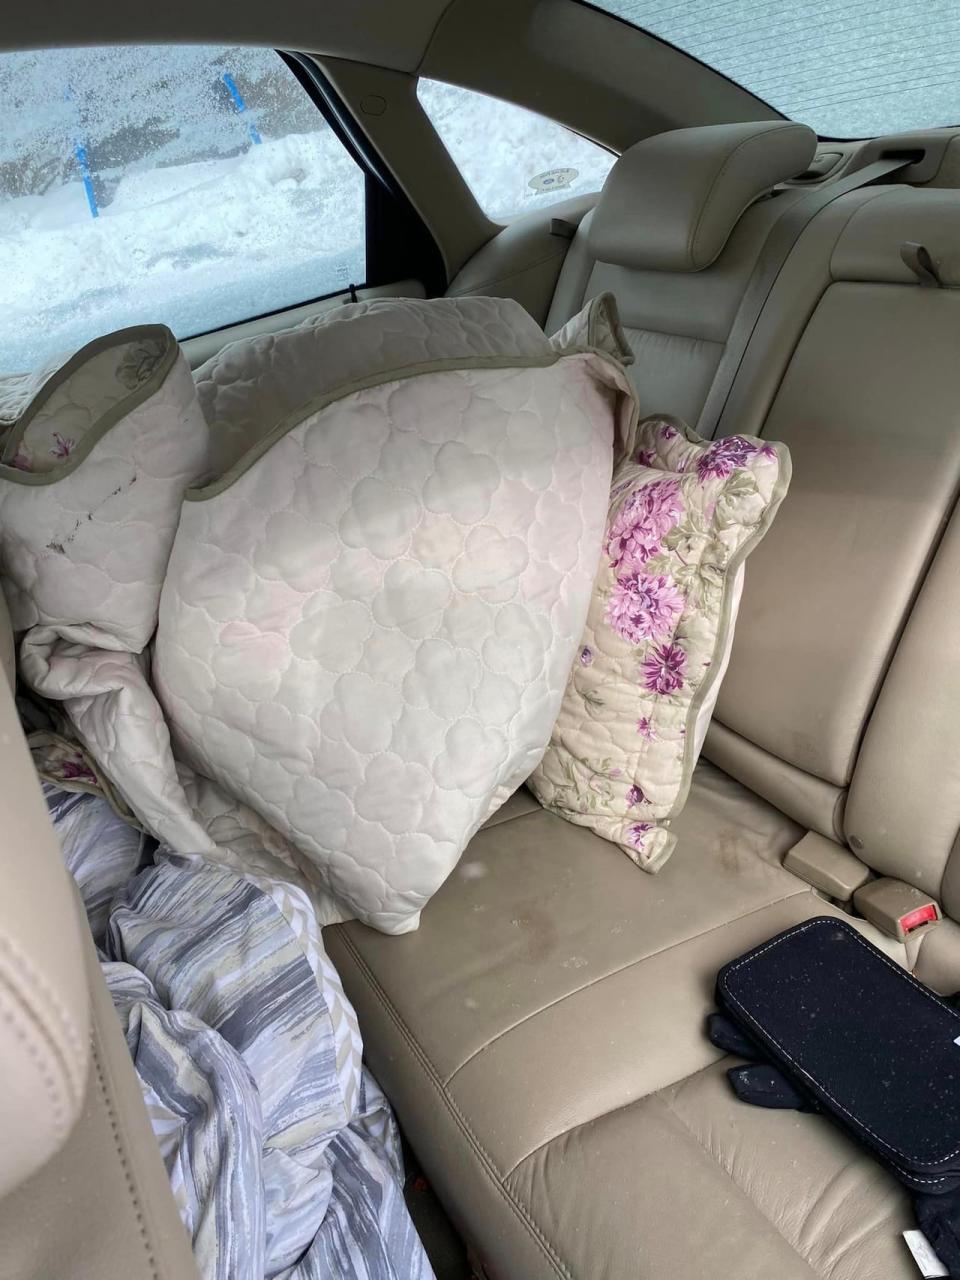 Pillows and blankets were left behind by the person who stole Dave Wilson's car.